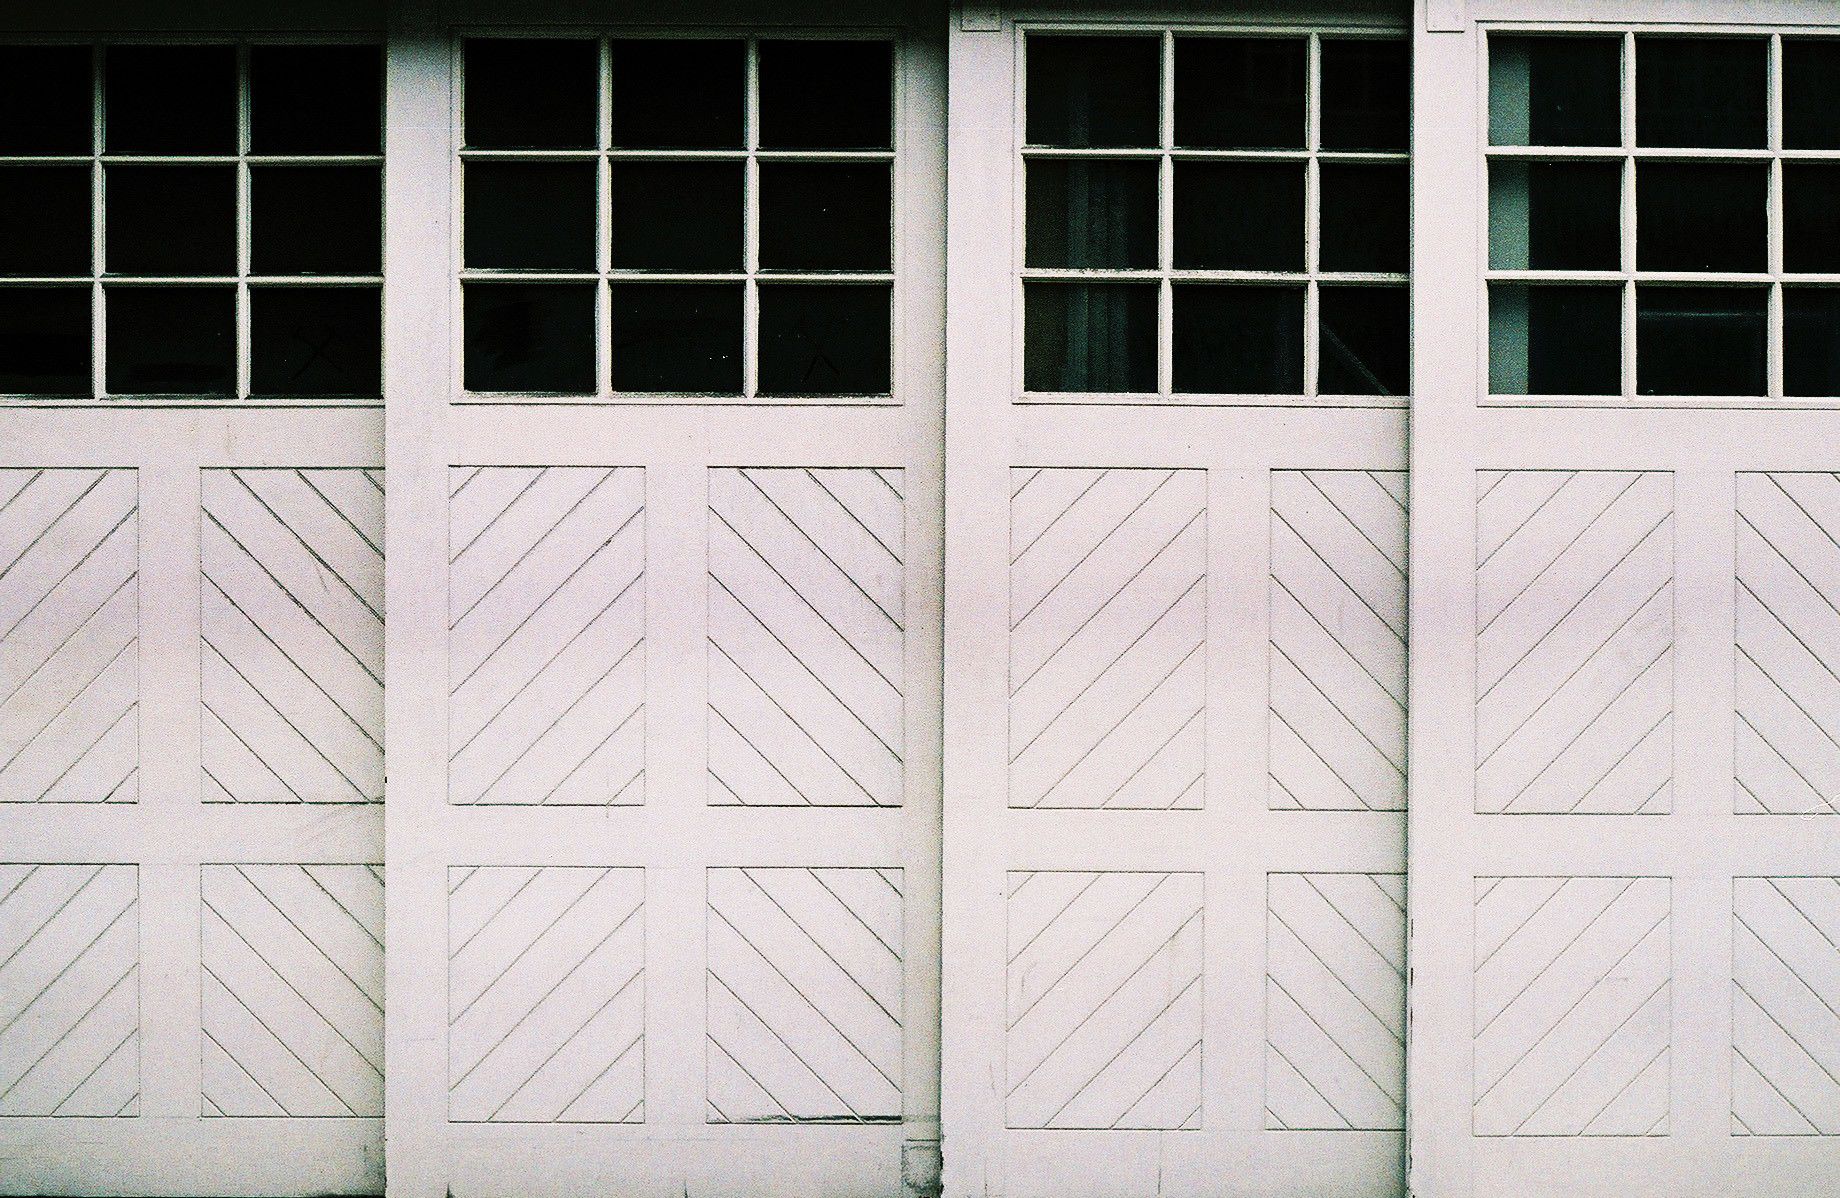 A photo of an older, wooden sliding garage door made of four panels, with windows near the top.